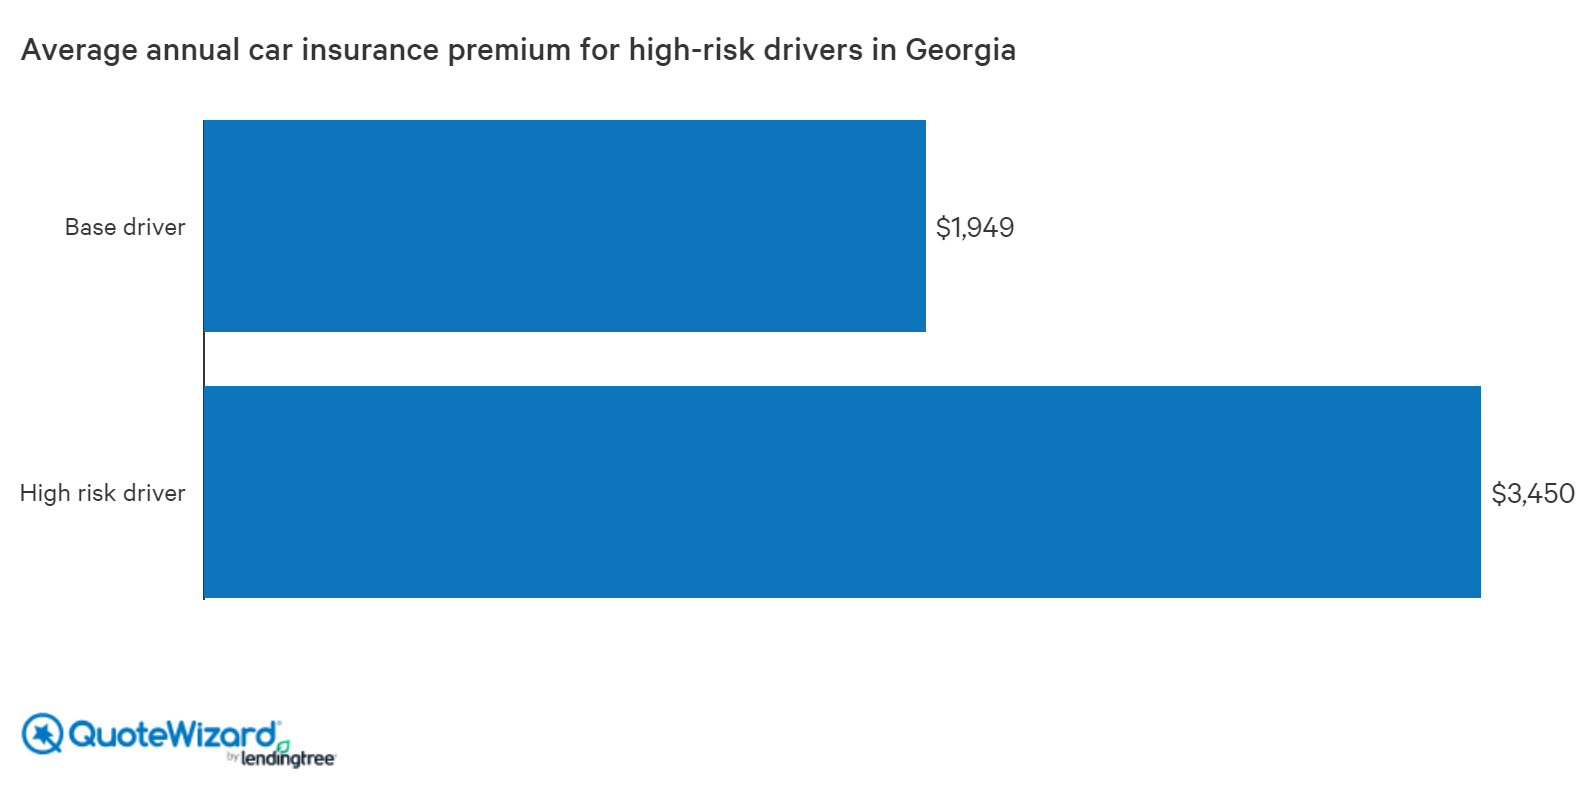 Unraveling: Why is Auto Insurance So Expensive in Georgia?